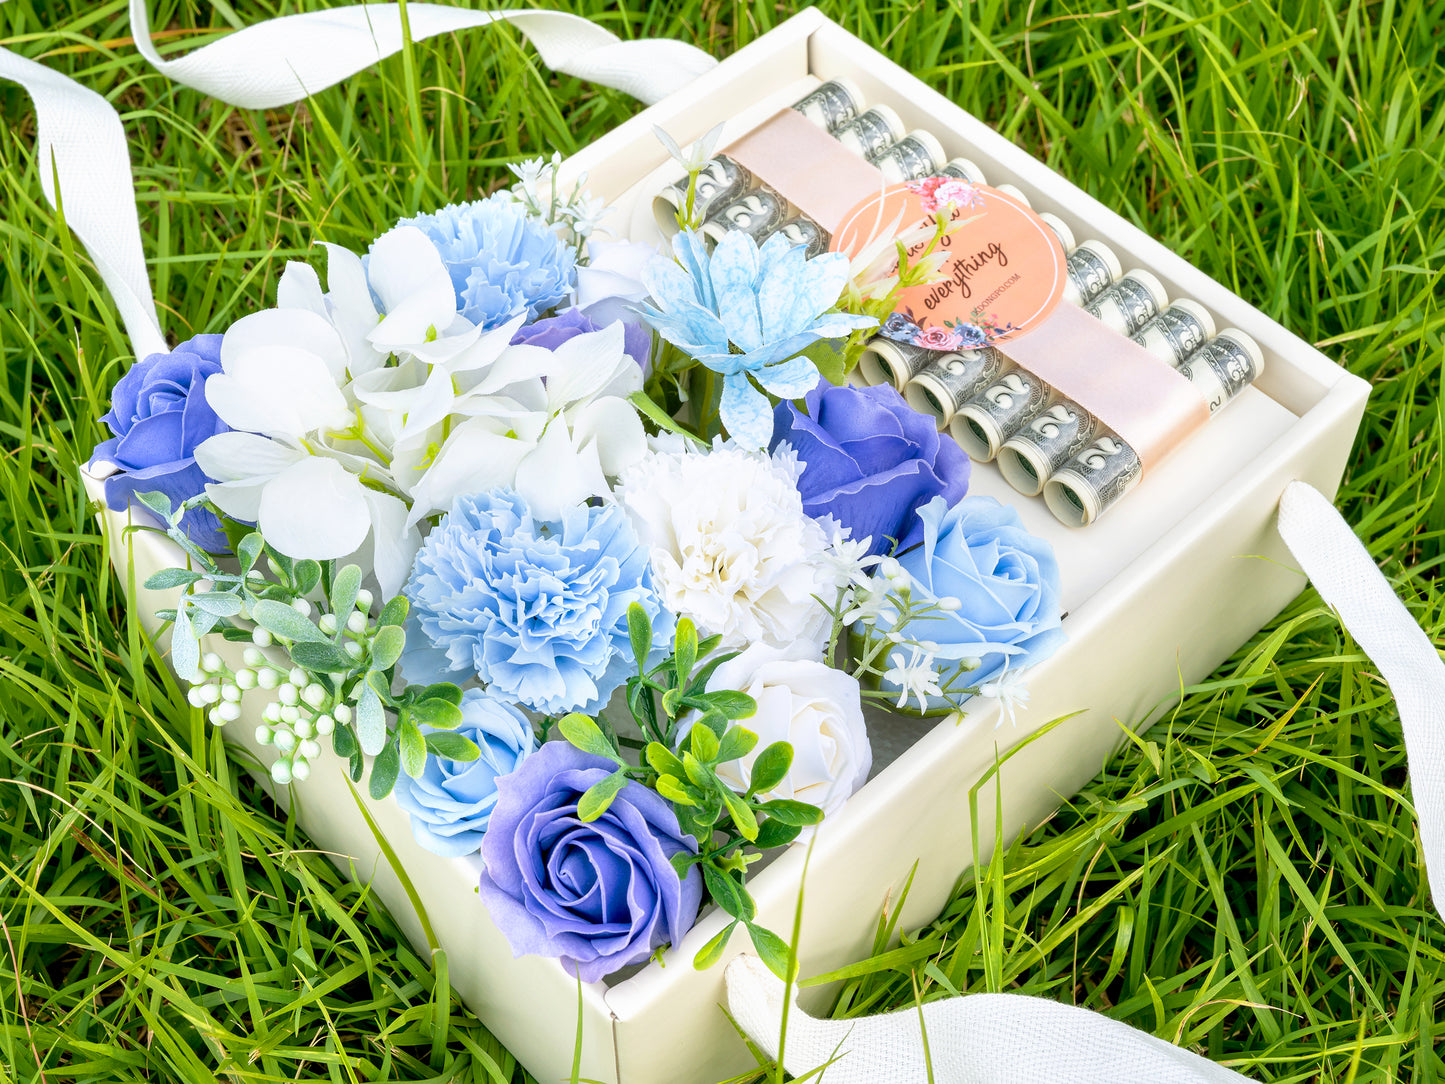 Soap Flowers Cash Gift Bouquet Box - Mixed Blossom (Cash Roll type)